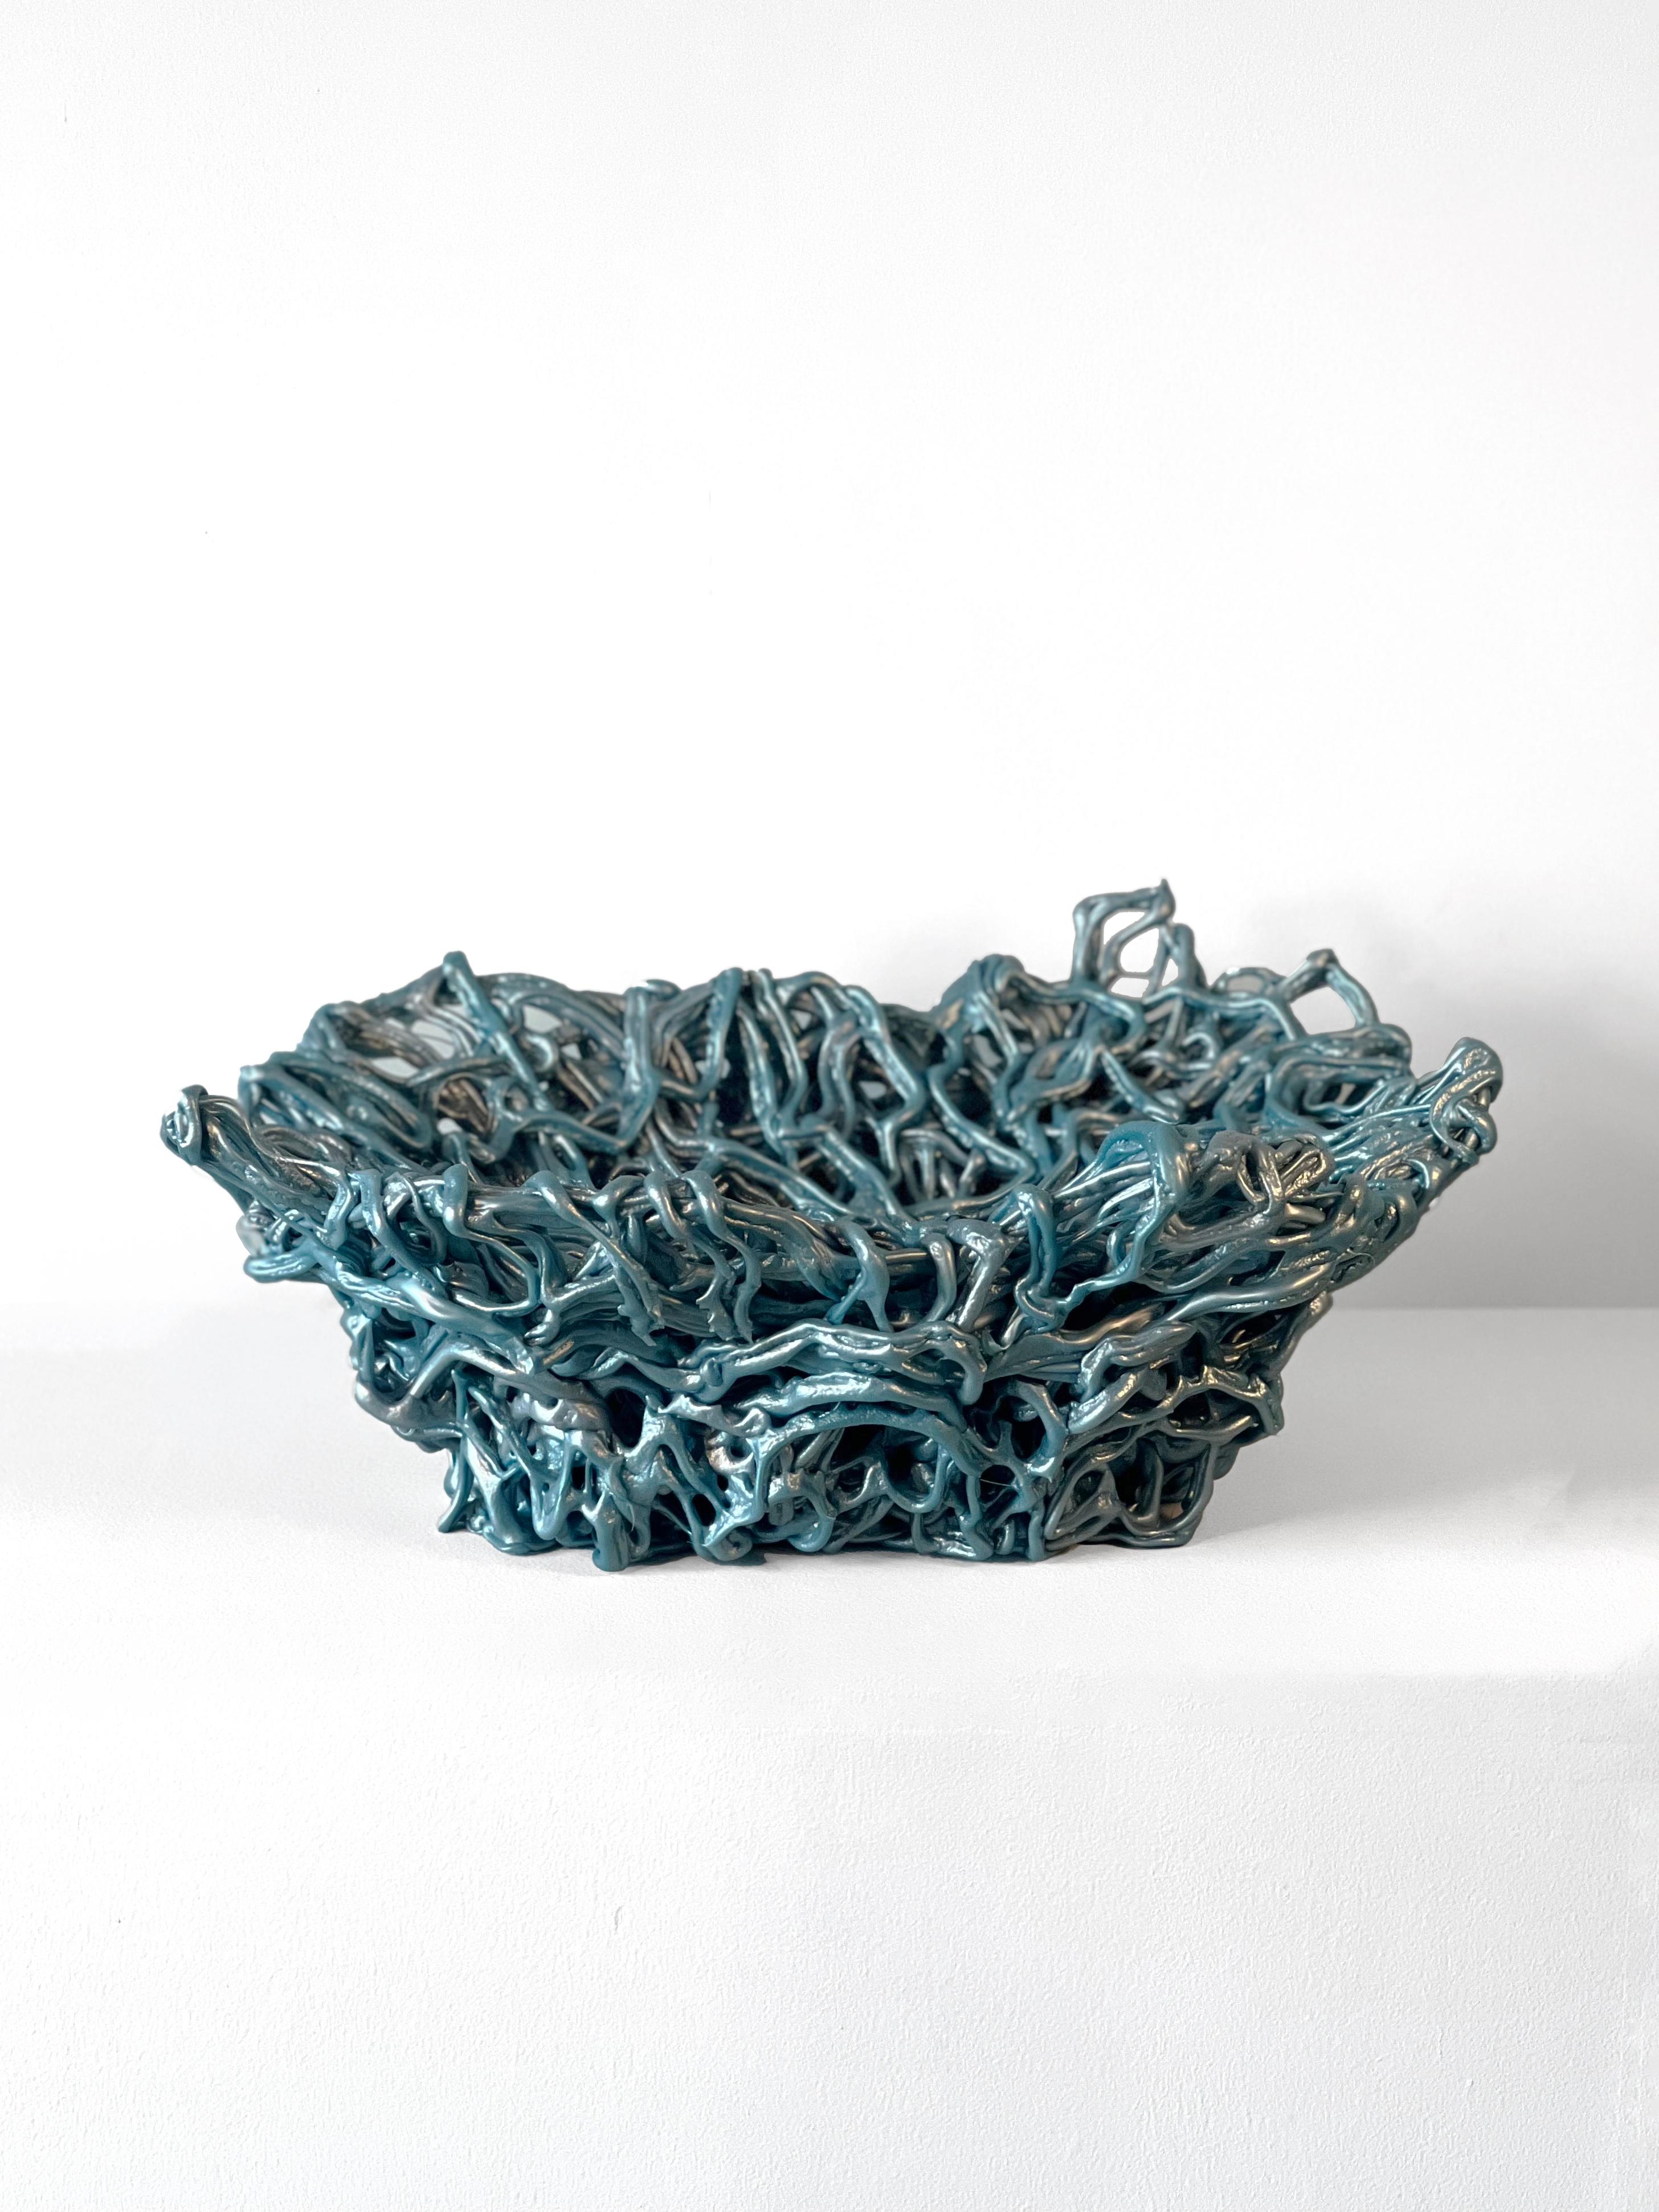 A unique and intricate piece that can take the form of a basket, vessel, or sculpture.  Teal and silver post-consumer plastic gets melted down and extruded to create this organic form vessel.  This piece explores the functionality of plastic beyond